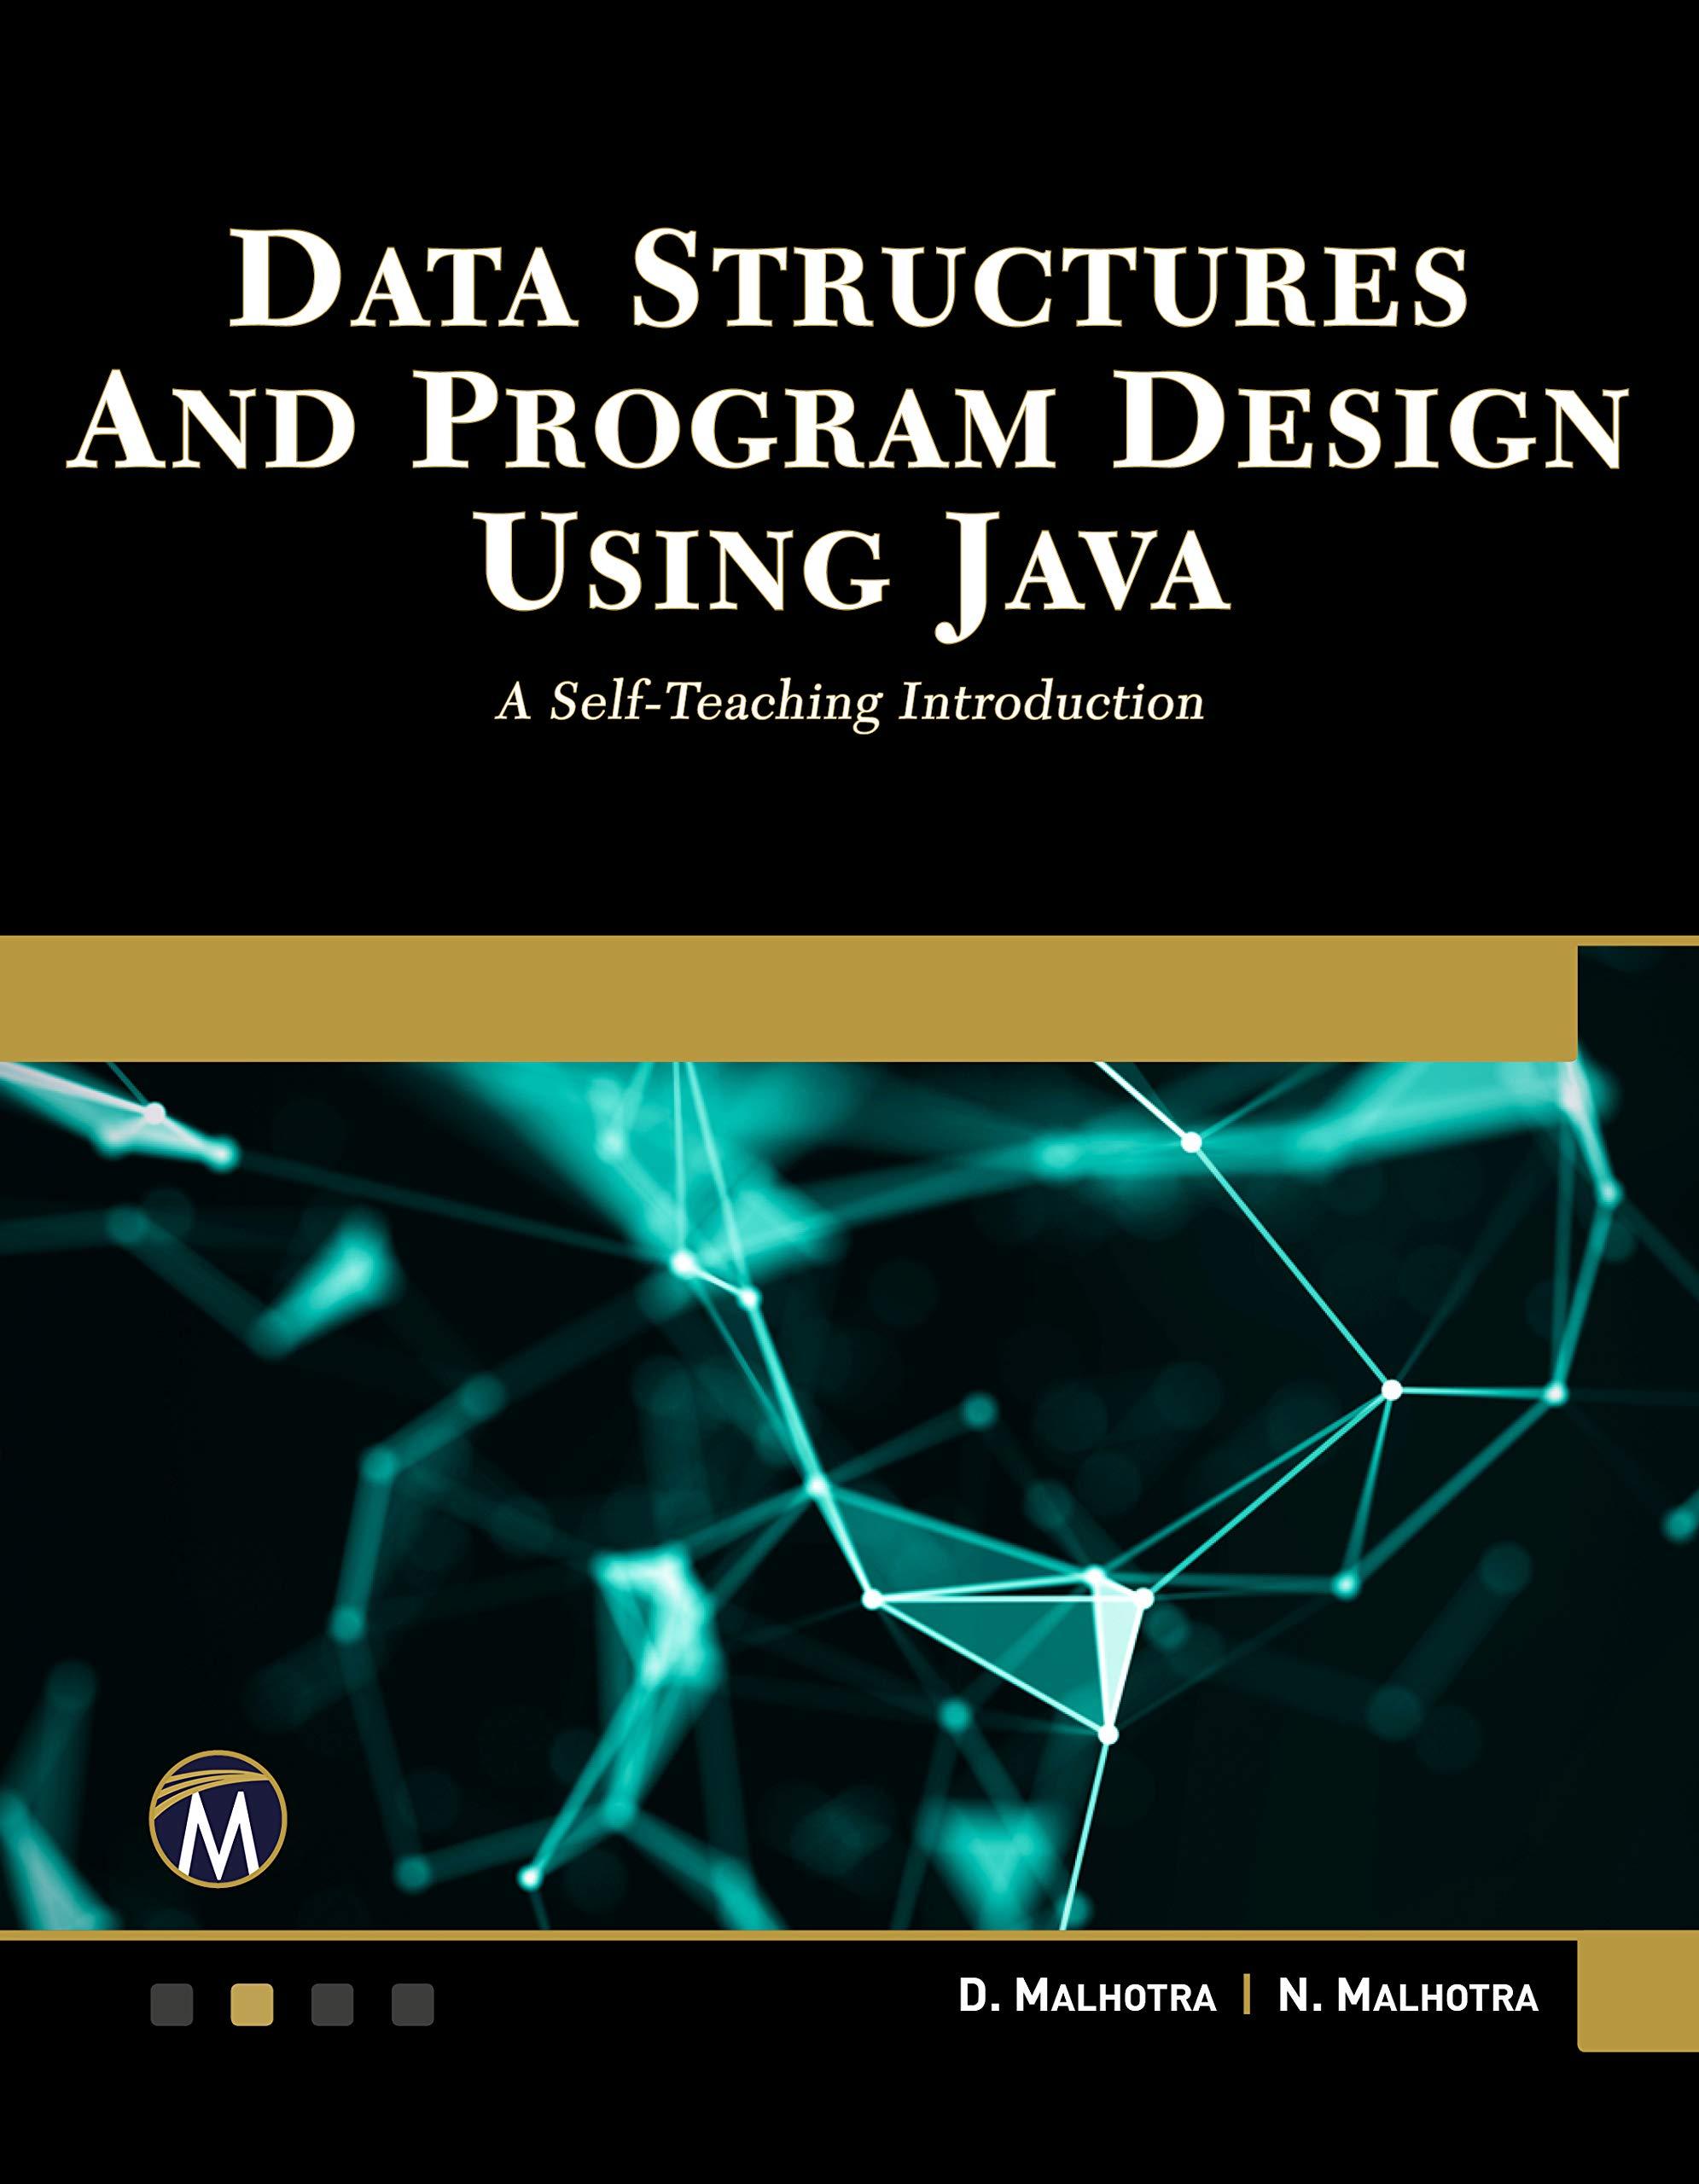 data structures and program design using java a self teaching introduction 1st edition d. malhotra phd, n.